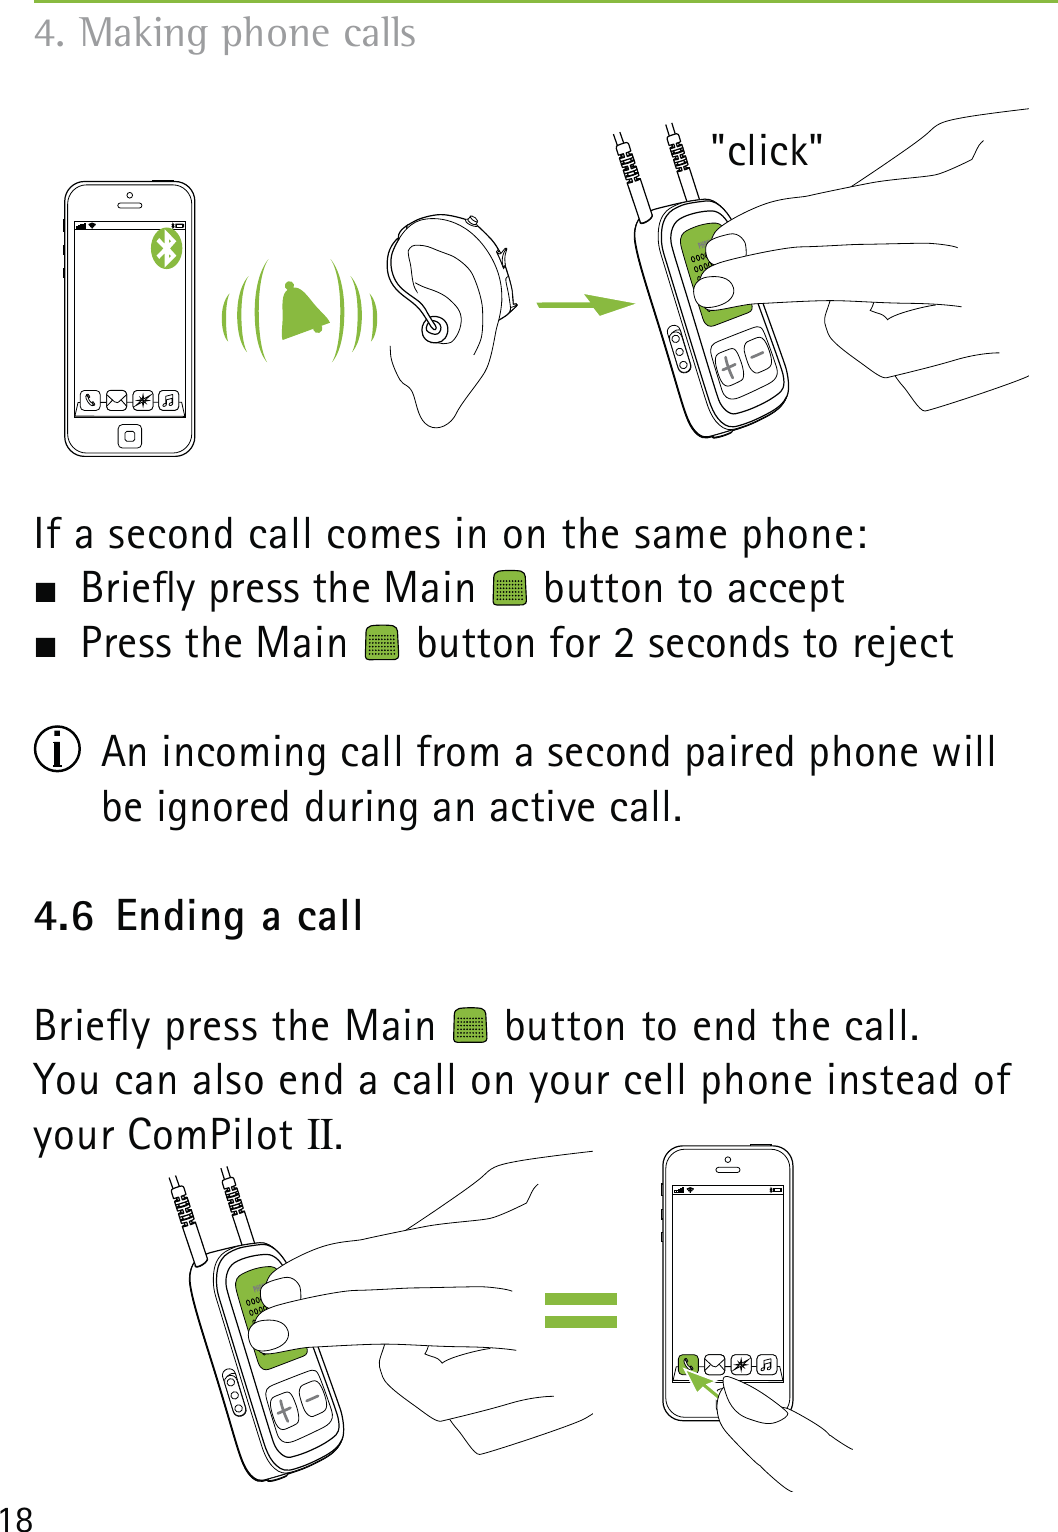 18If a second call comes in on the same phone: Briey press the Main   button to accept Press the Main   button for 2 seconds to reject  An incoming call from a second paired phone will  be ignored during an active call.4.6  Ending a callBriey press the Main   button to end the call. You can also end a call on your cell phone instead of your ComPilot II.4. Making phone calls&quot;click&quot;